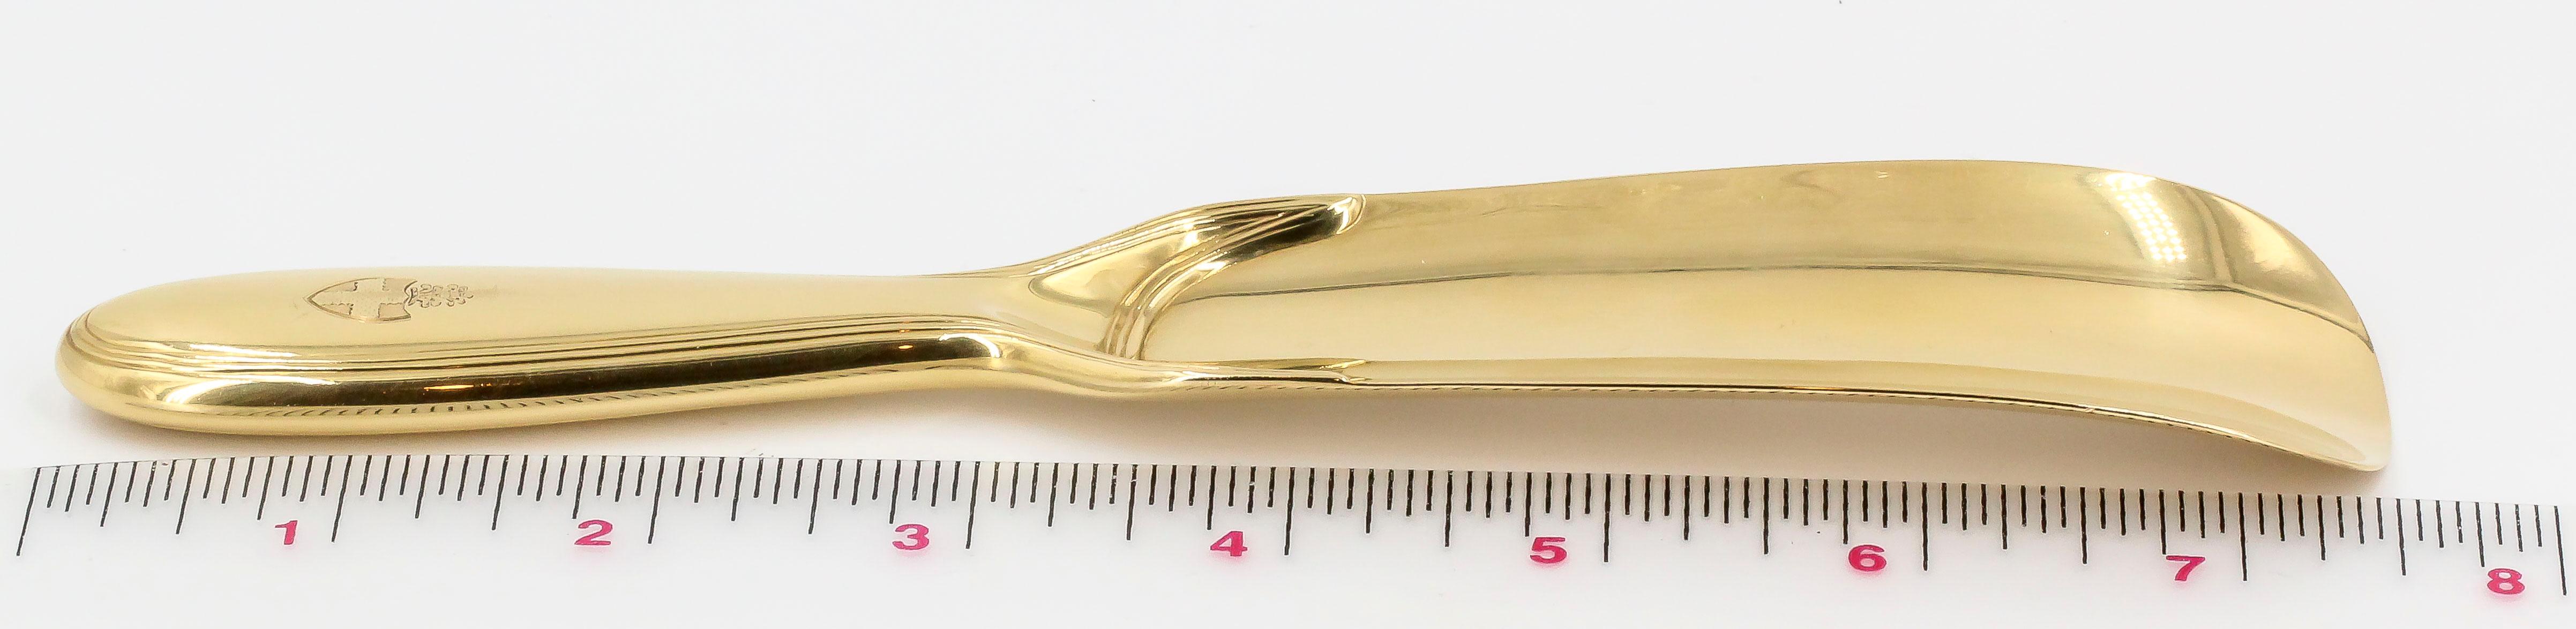 Chic and unusual 18K yellow gold shoehorn by Tiffany & Co. It features a crest at the bottom of the handle bearing a cross. Beautifully made and highly functional.

Hallmarks: Tiffany & Co. Makers, 18KT Gold, reference numbers, maker's mark.